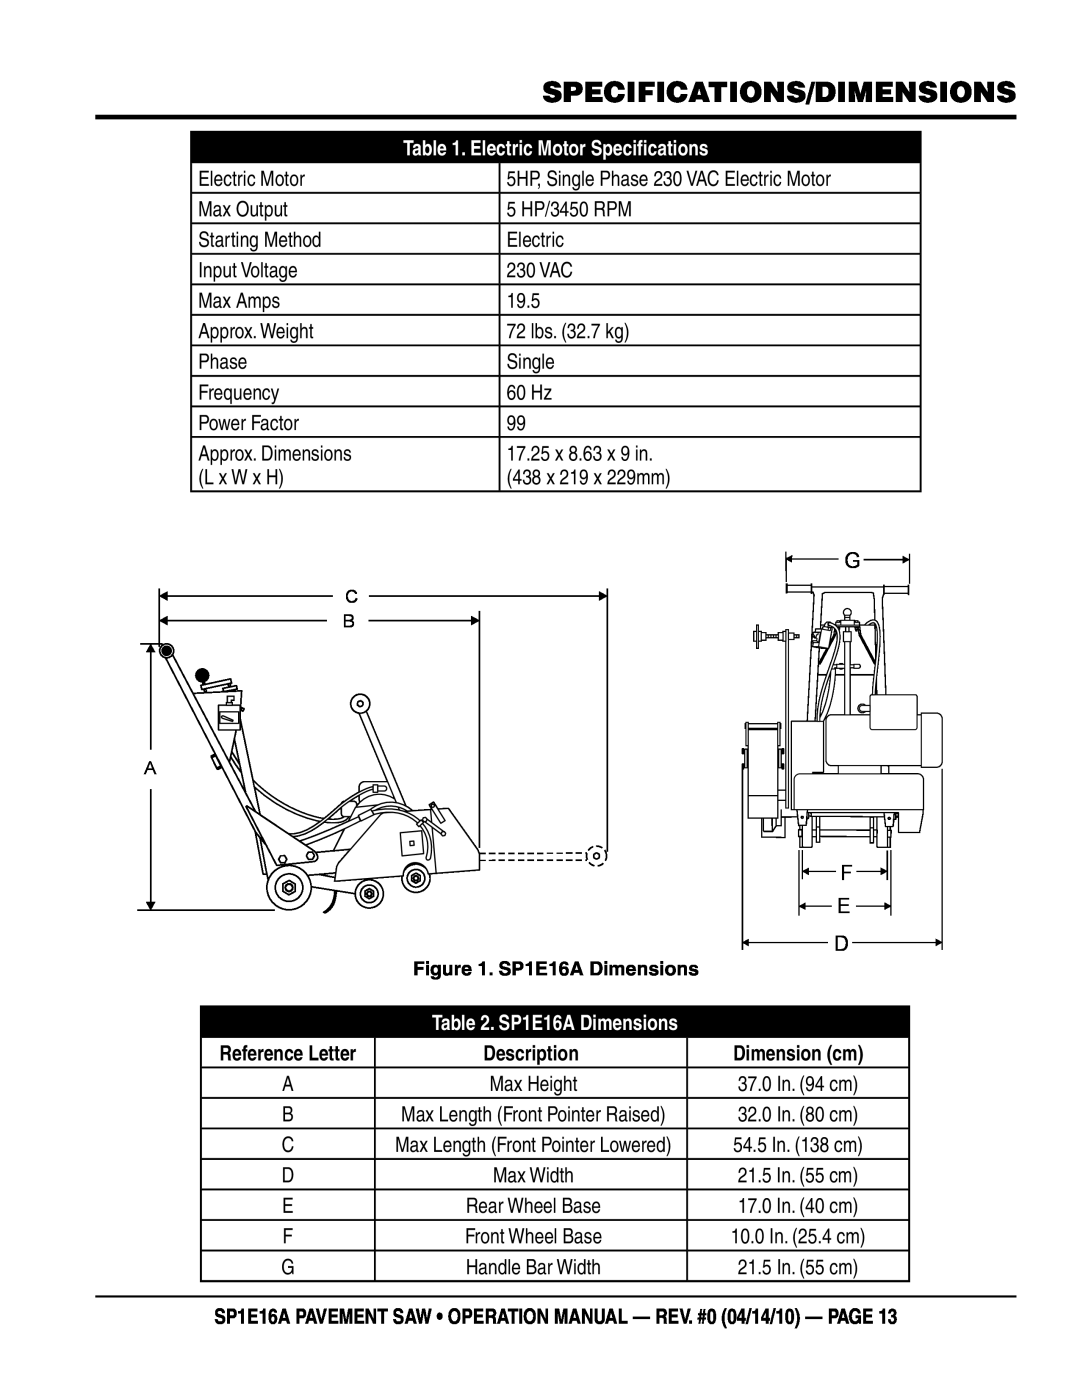 Multiquip SP1E16A operation manual specifications/dimensions, Electric Motor Specifications 